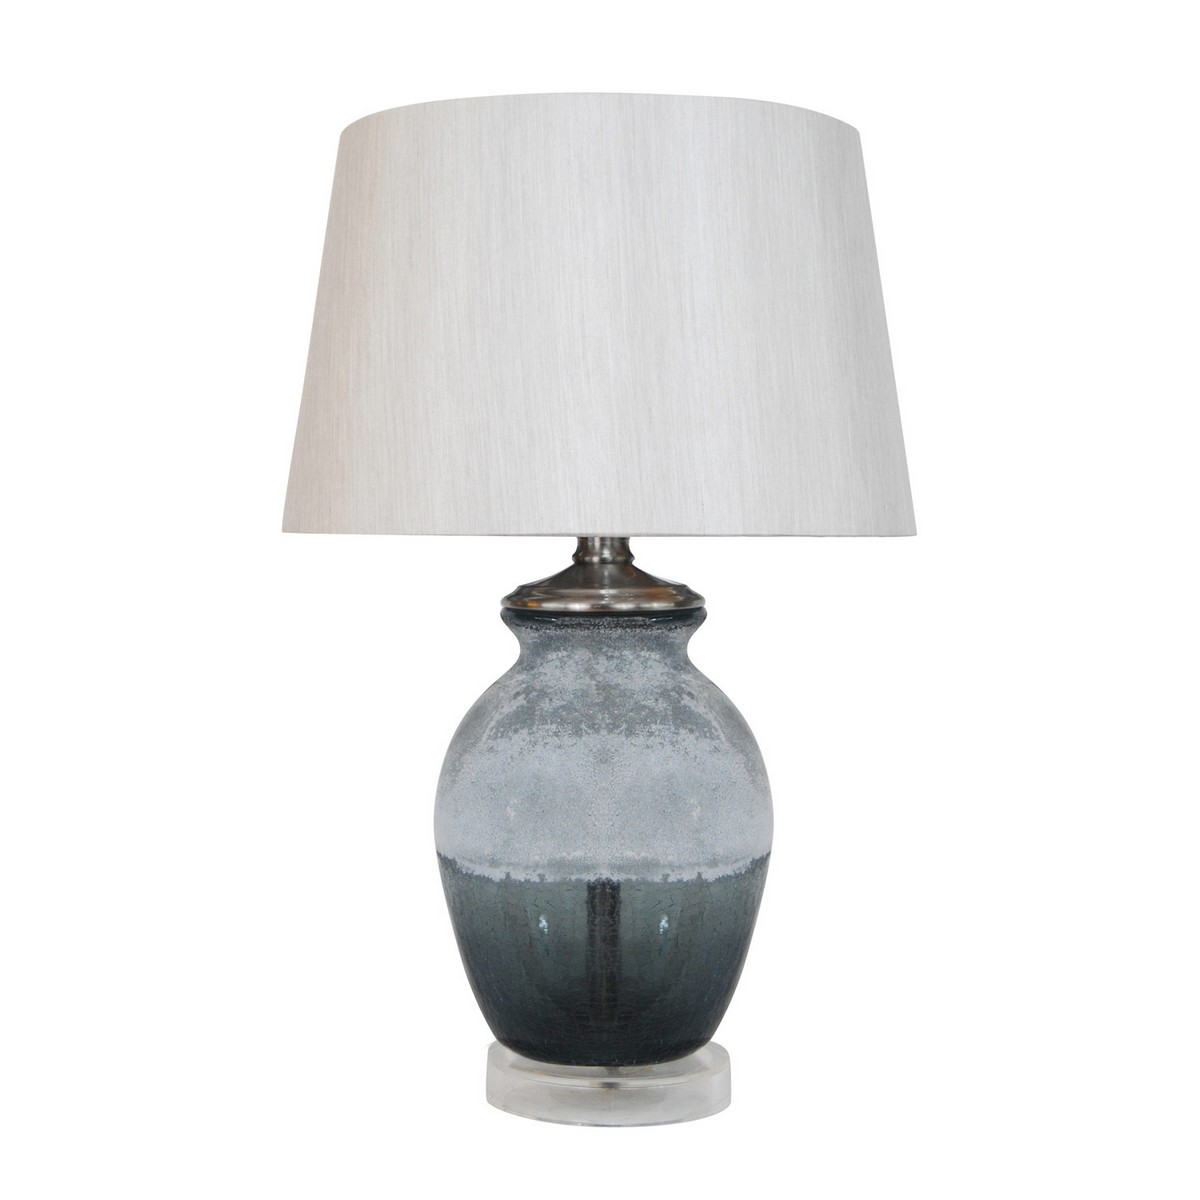 Elk Lighting D295 Table Lamp - Grey Crackle with Frosting